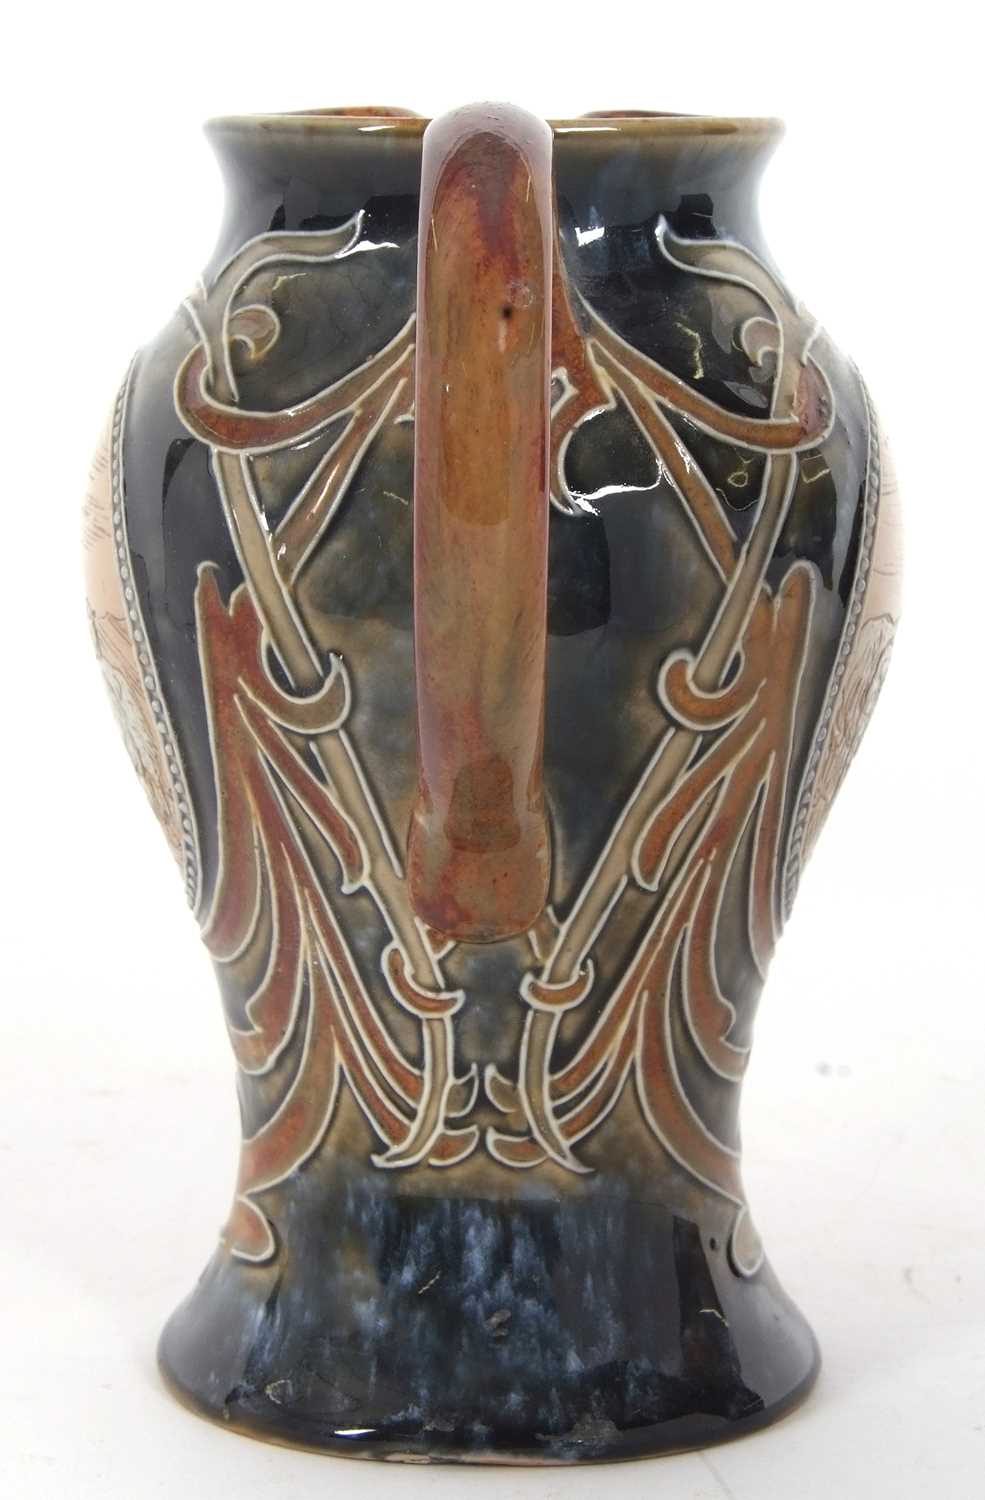 Royal Doulton jug of baluster form with incised Art Nouveau decoration and oval panels of sheep by - Image 5 of 6